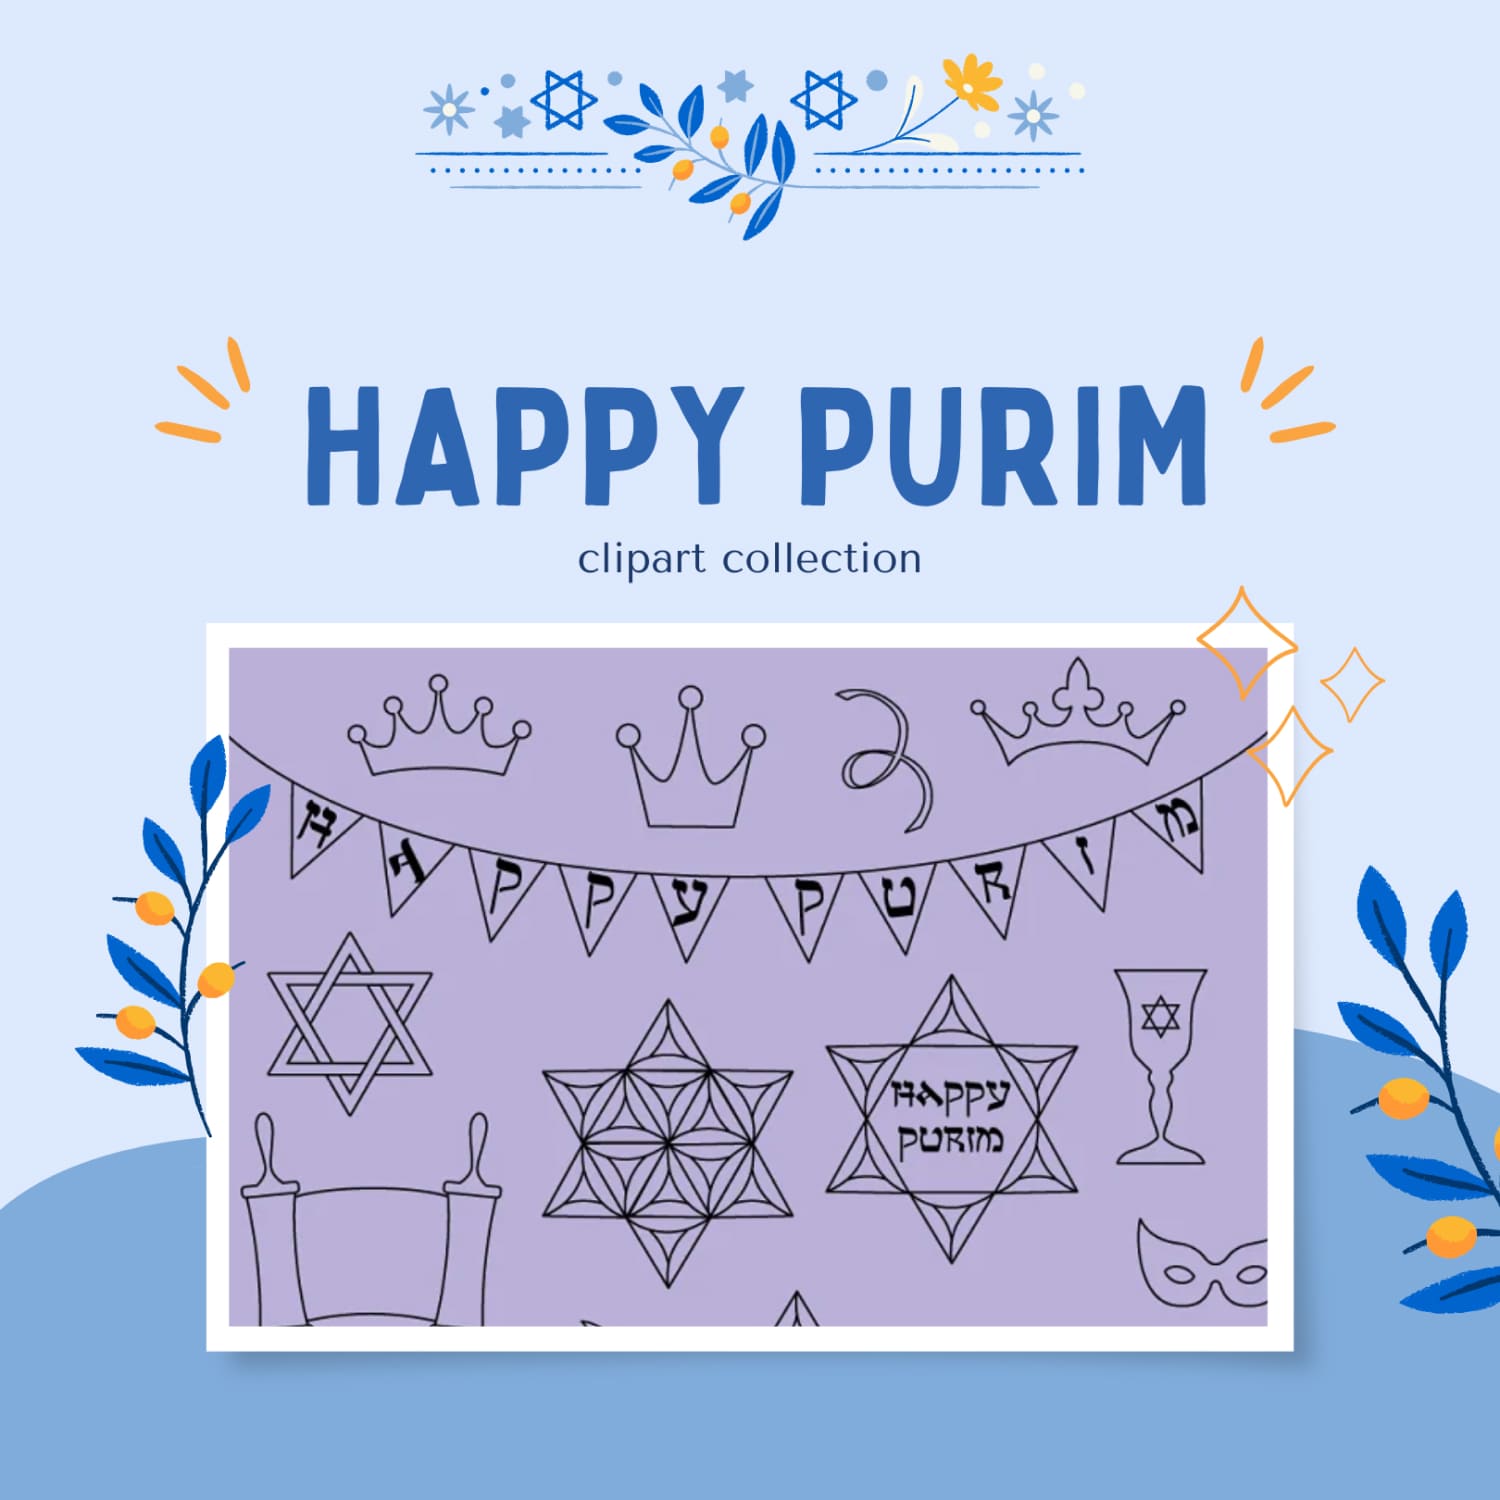 Six-pointed stars are drawn with a black outline for the holiday of Purim.